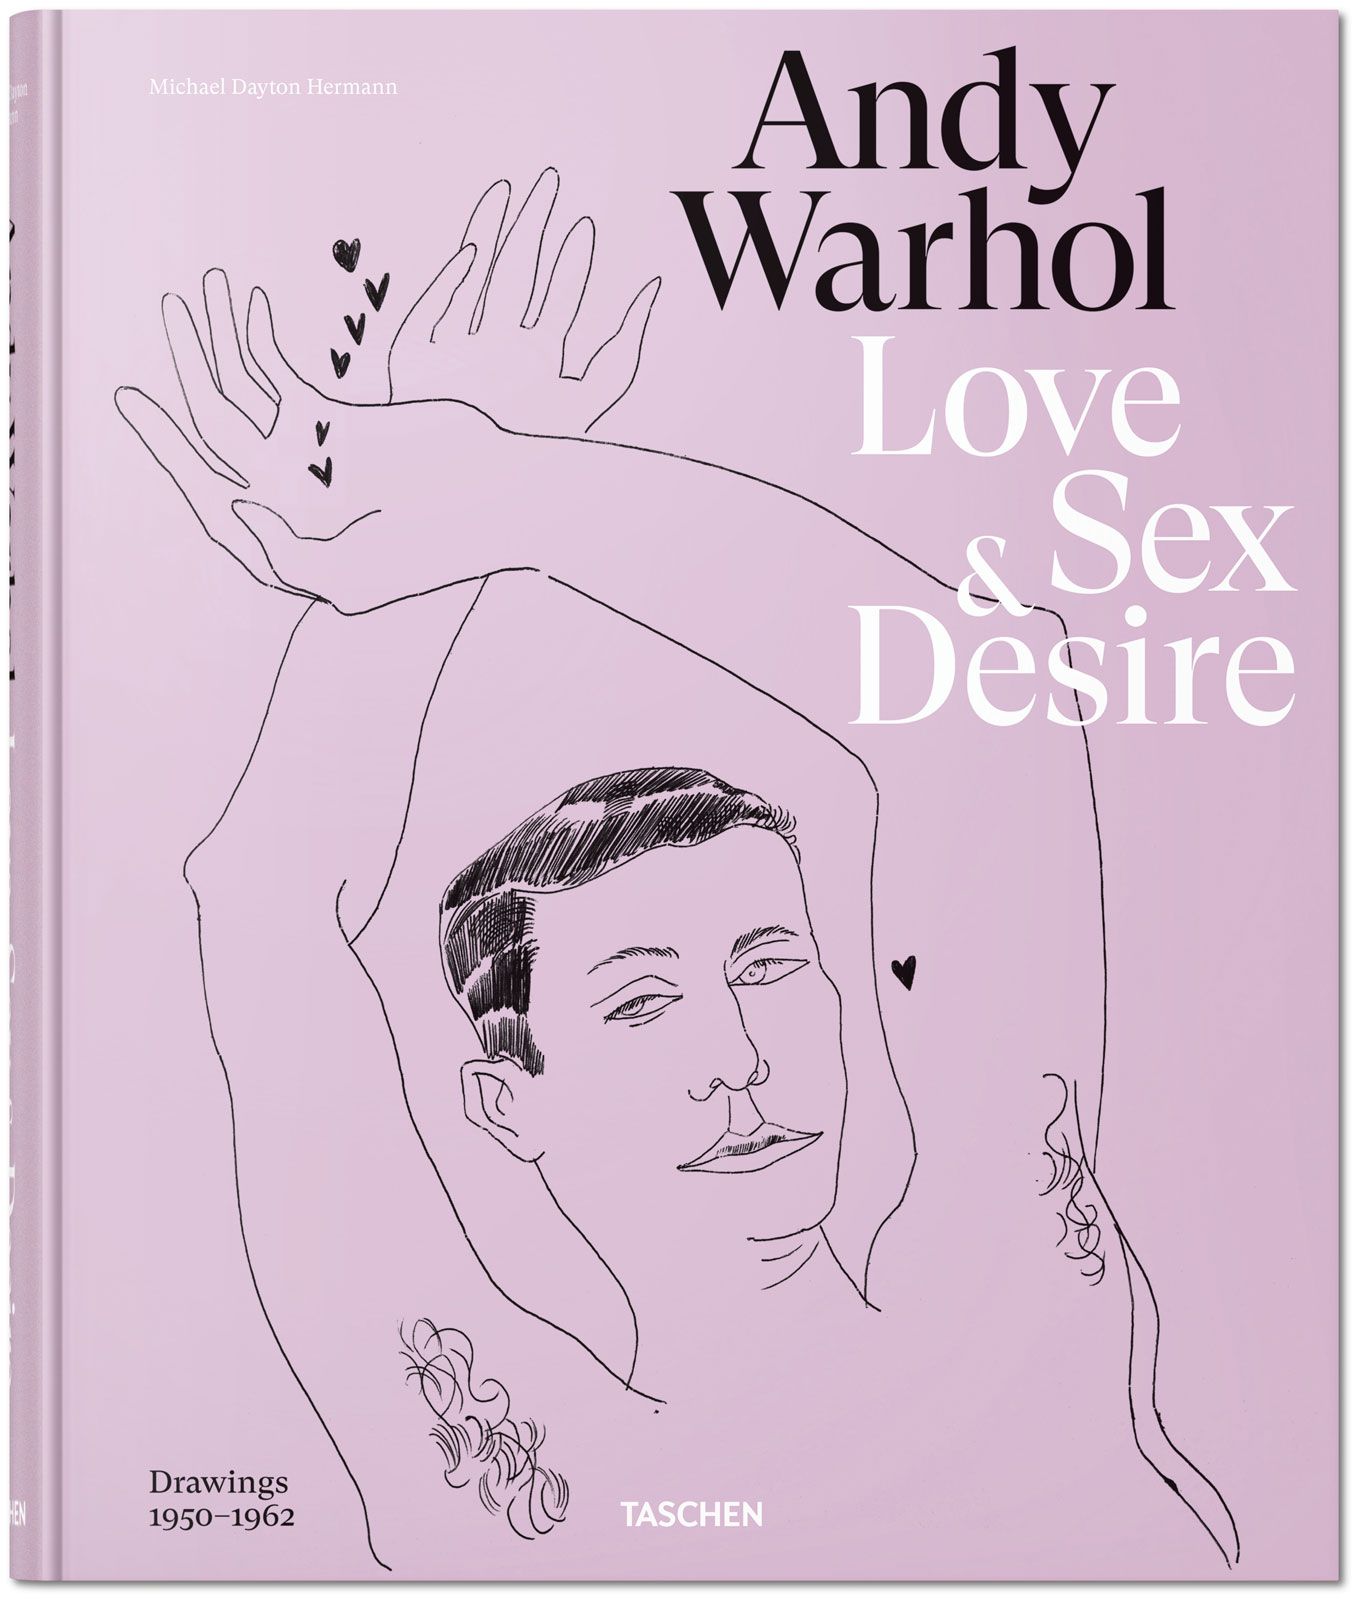 300 Rarely-Seen, Risqué Drawings by Andy Warhol Published in the New Book, Andy Warhol Love, Sex, and Desire